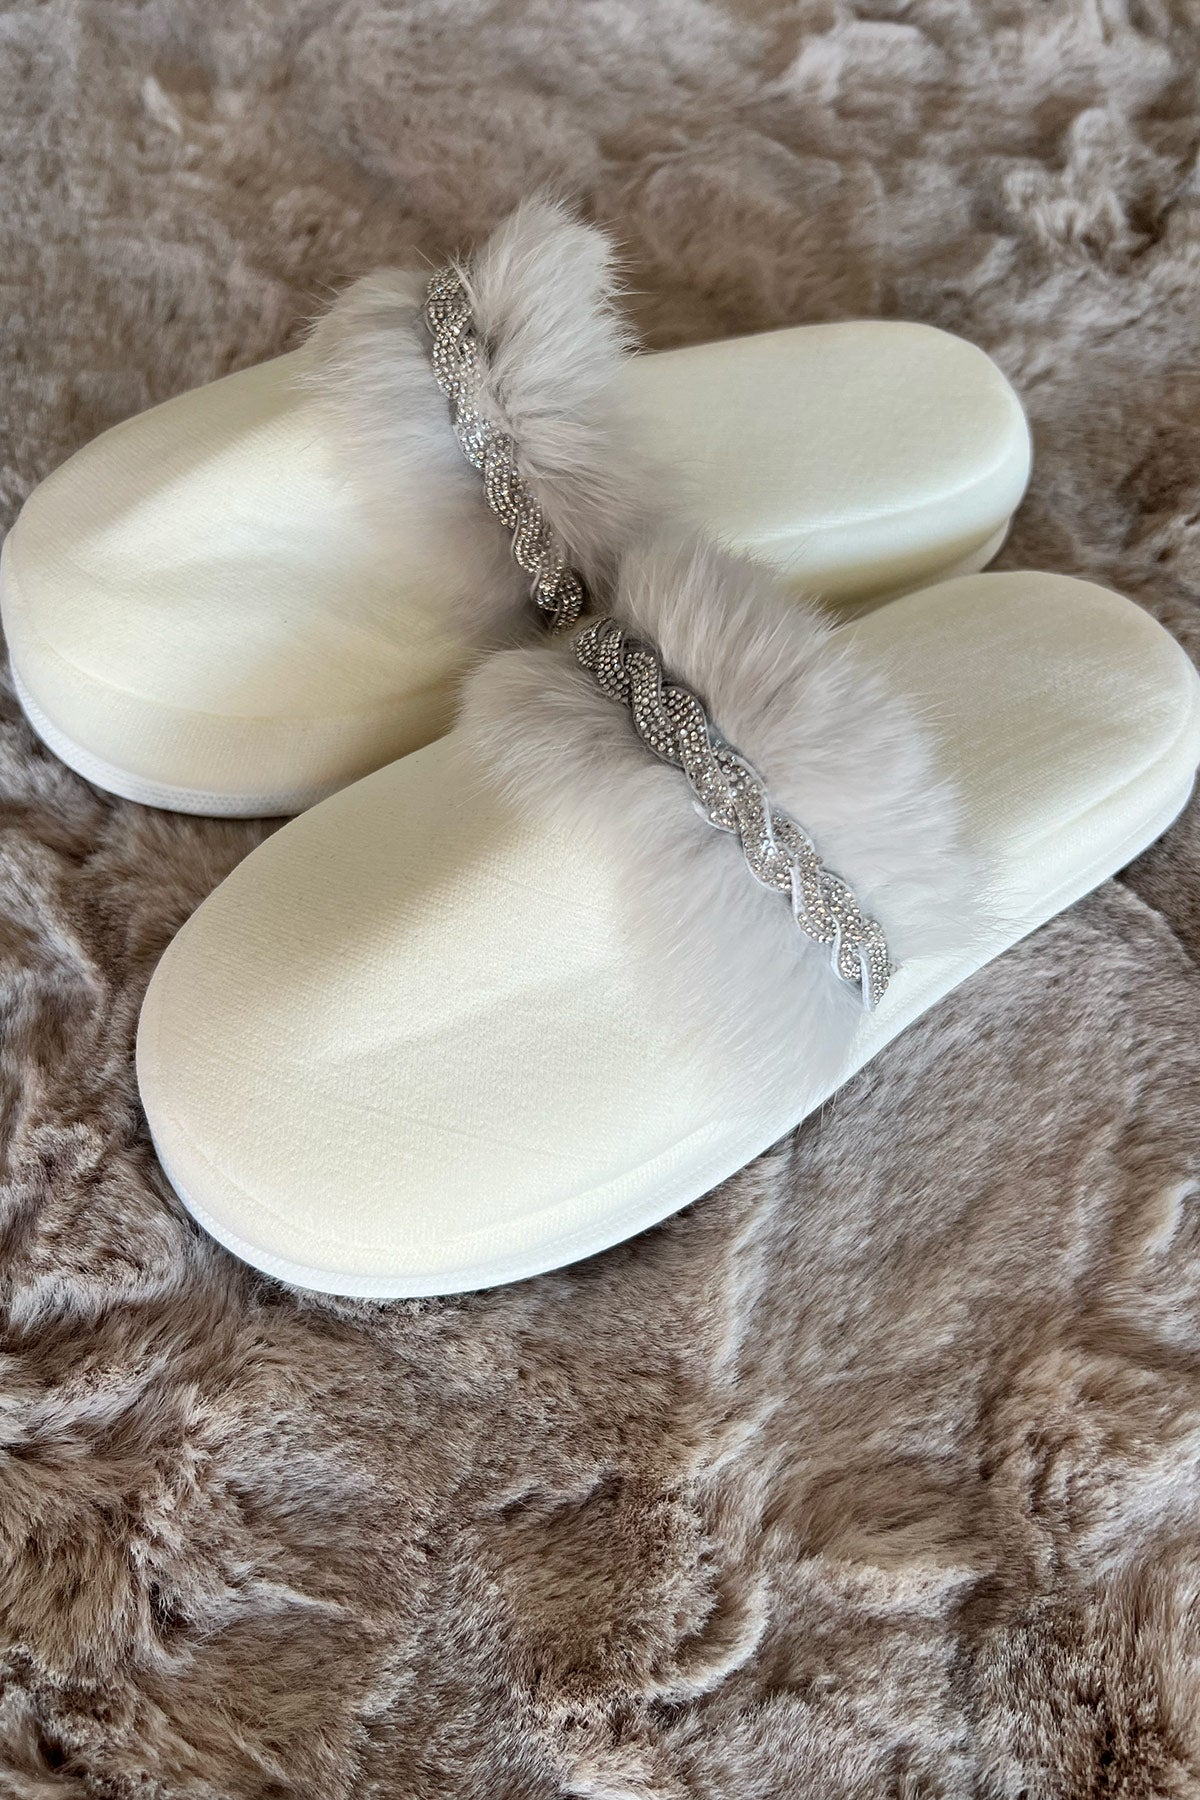 Shopymommy 75008 Feather Themed Maternity Slippers Grey